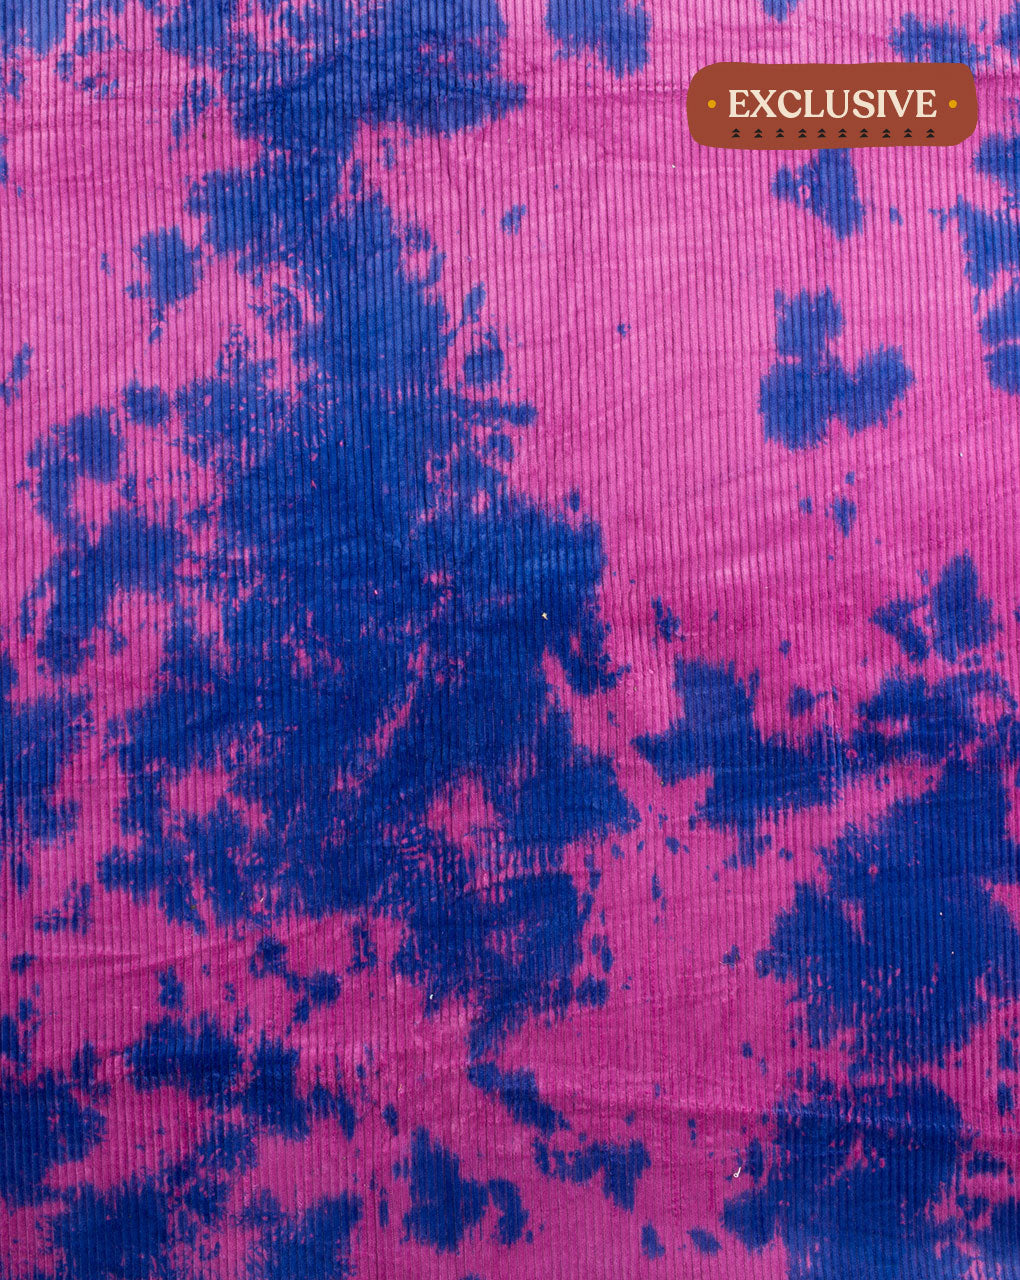 Exclusive Hand Tie & Dye Corduroy Fabric ( 6 Wales and Width 54 Inches ) - Fabriclore.com